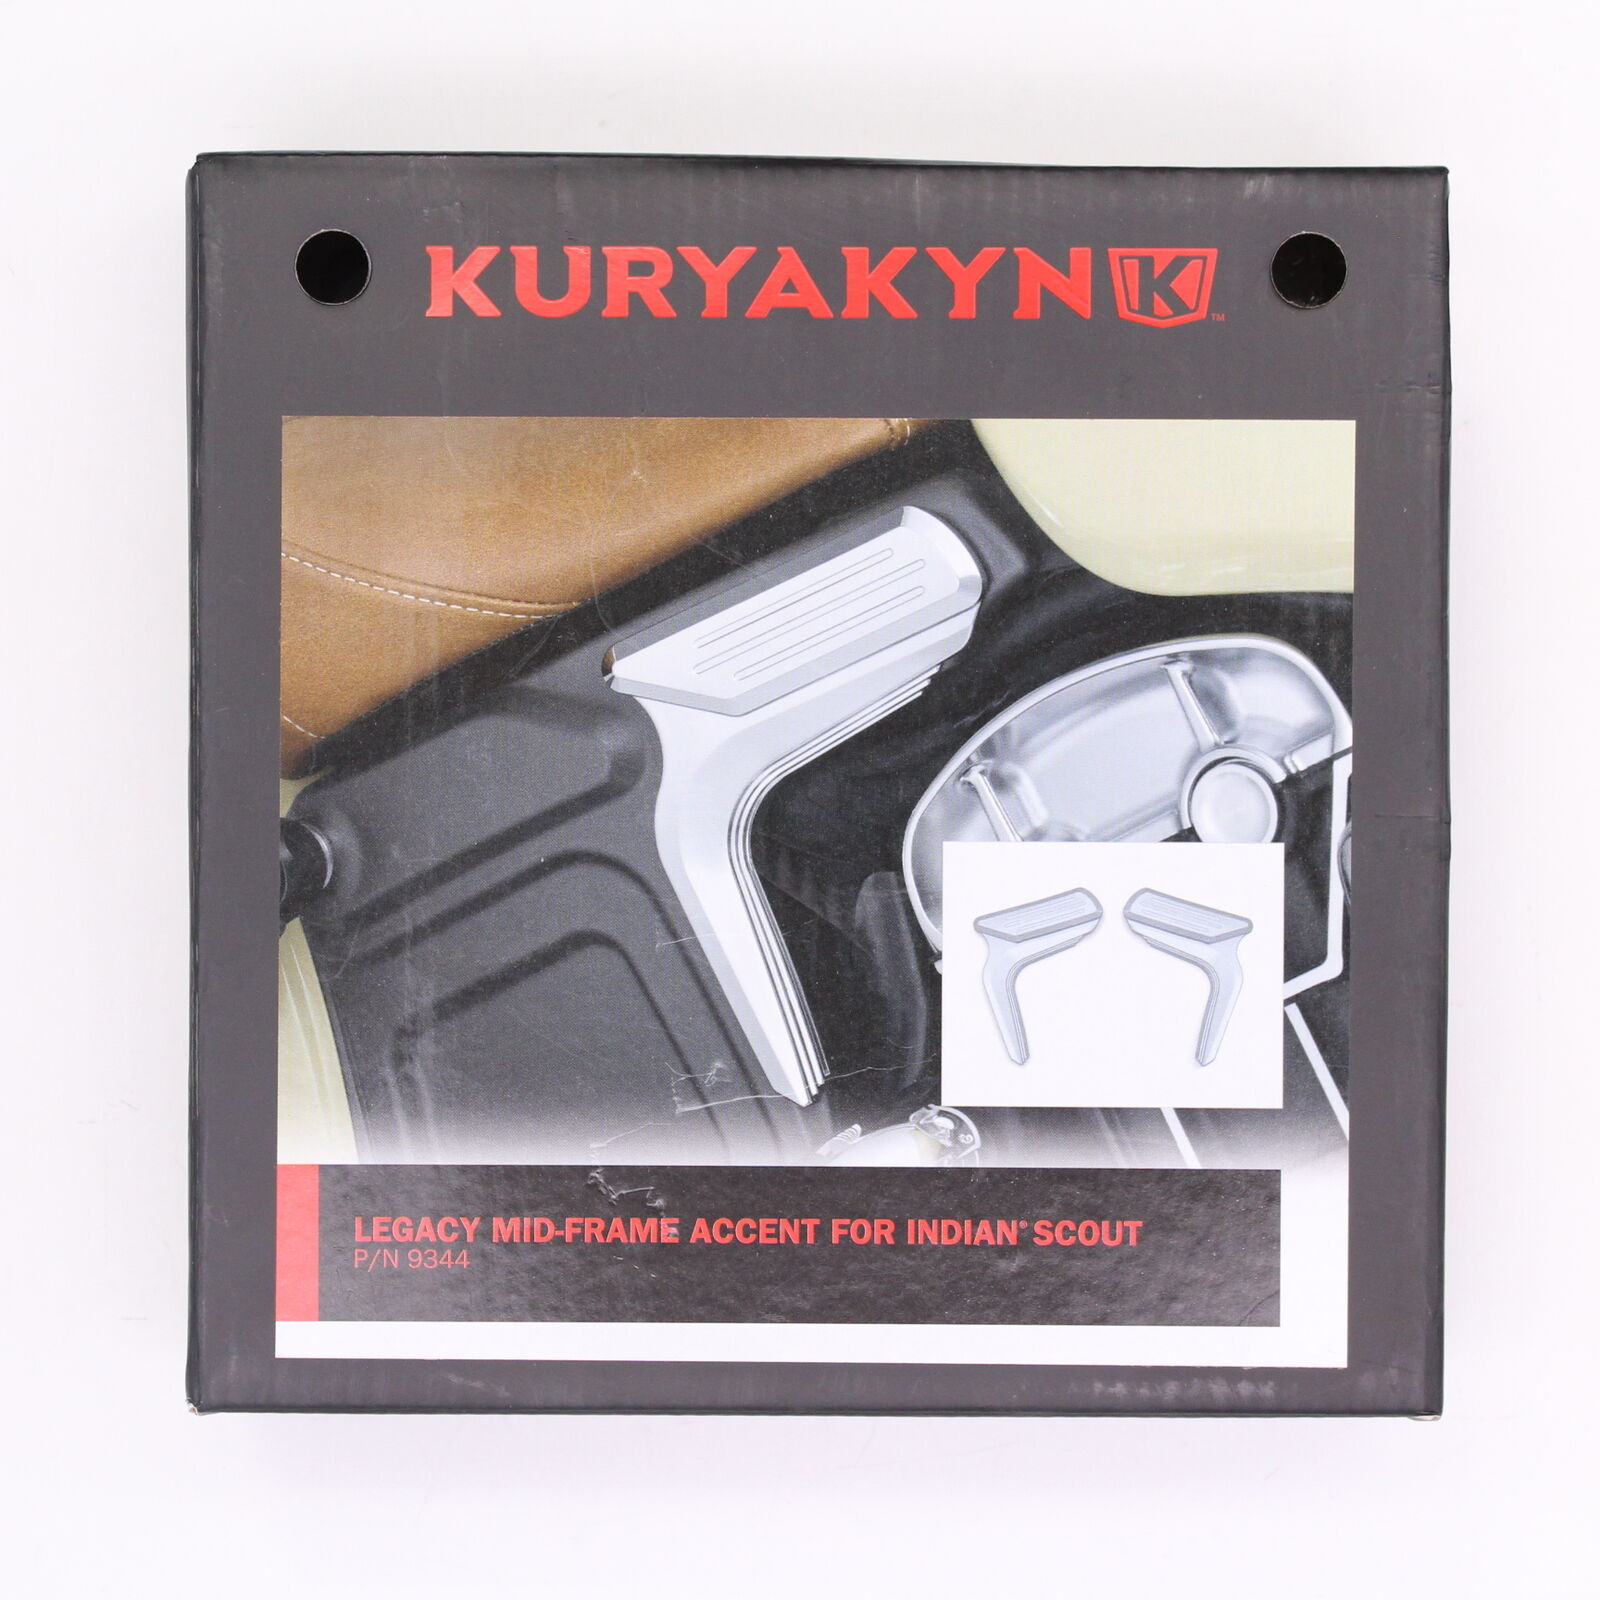 Kuryakyn Legacy Mid-Frame Accent Part Number - 9344